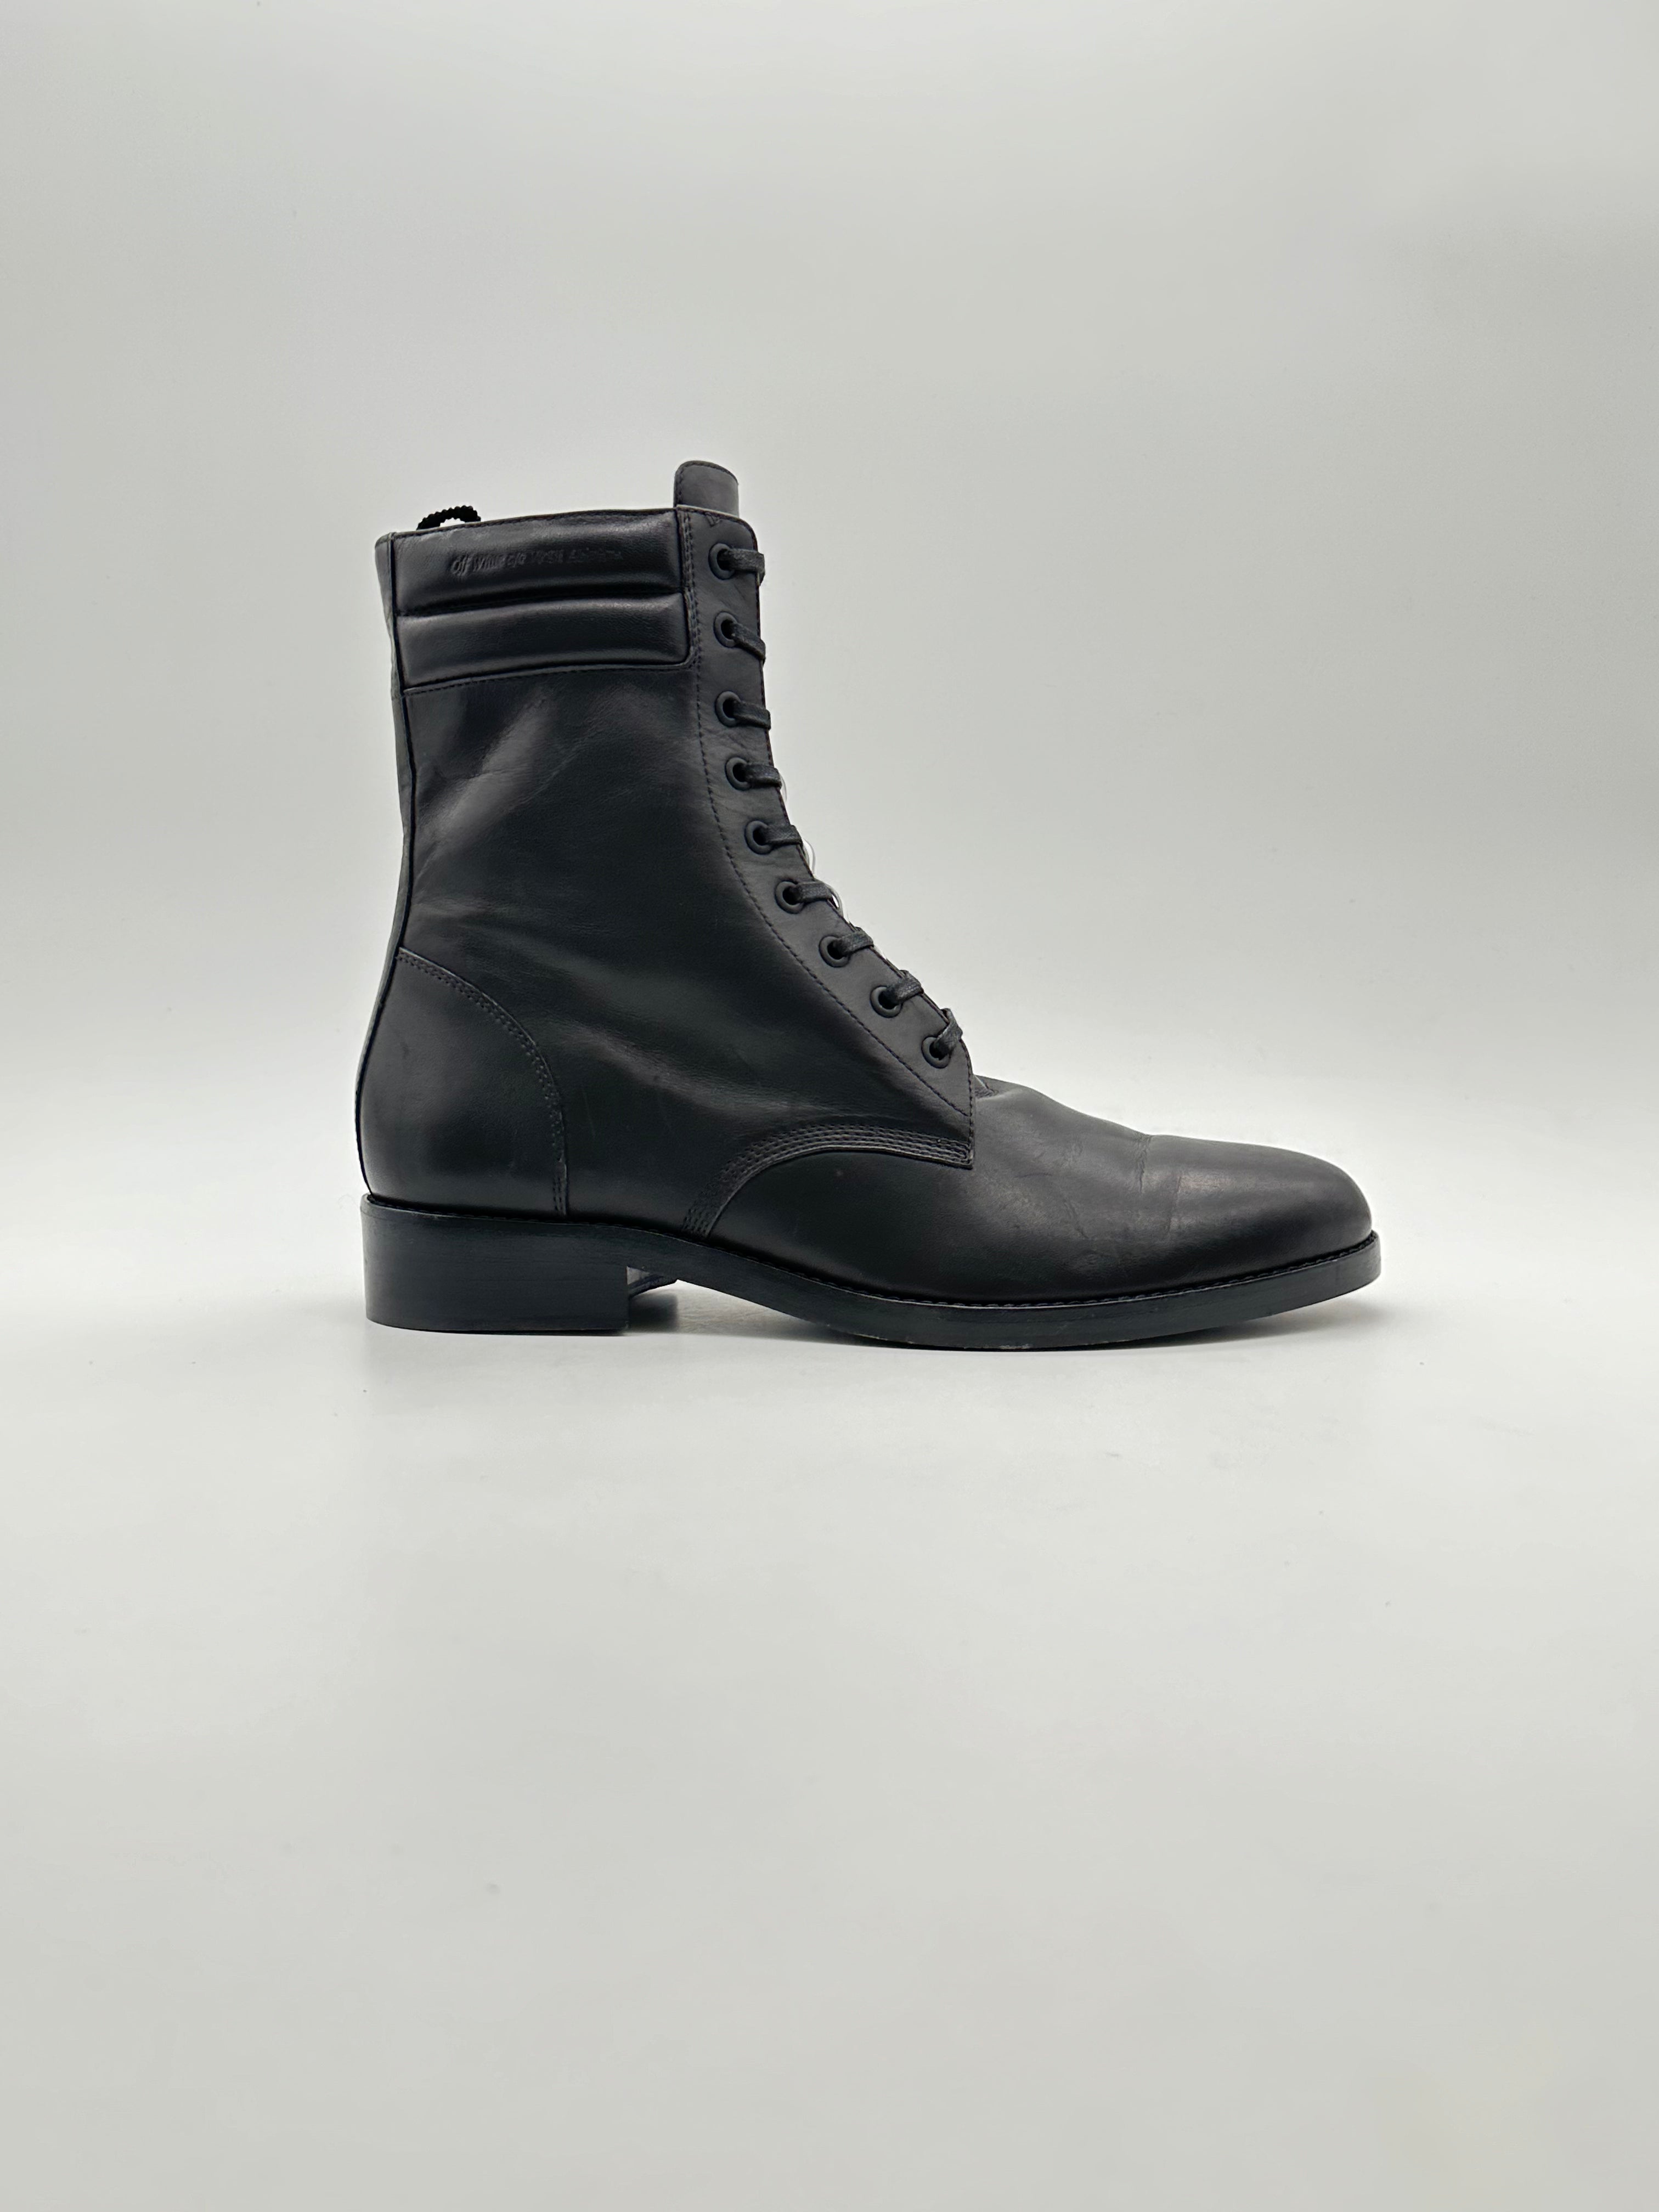 Leather Boots With Front Stripes